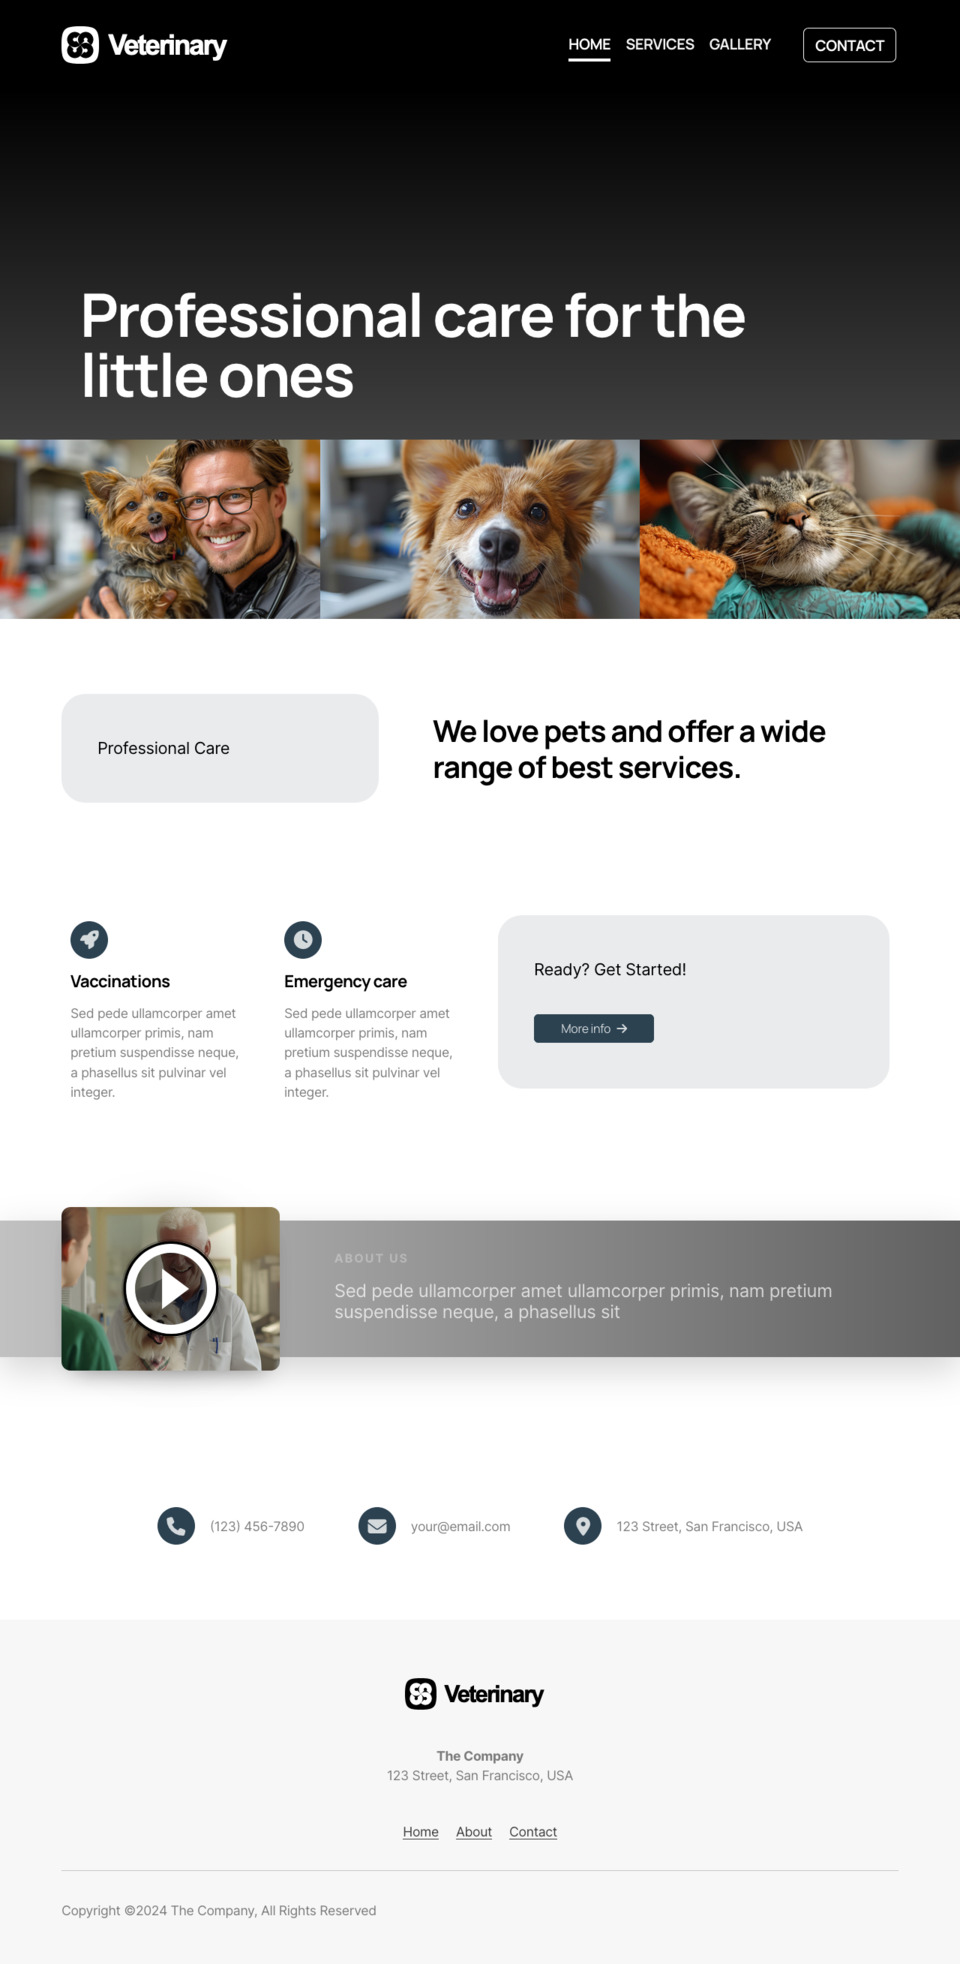 Veterinary Clinic Website Template - Perfect for veterinarians, pet care services, animal hospitals, and pet enthusiasts looking to create a beautiful and functional website without any coding skills.